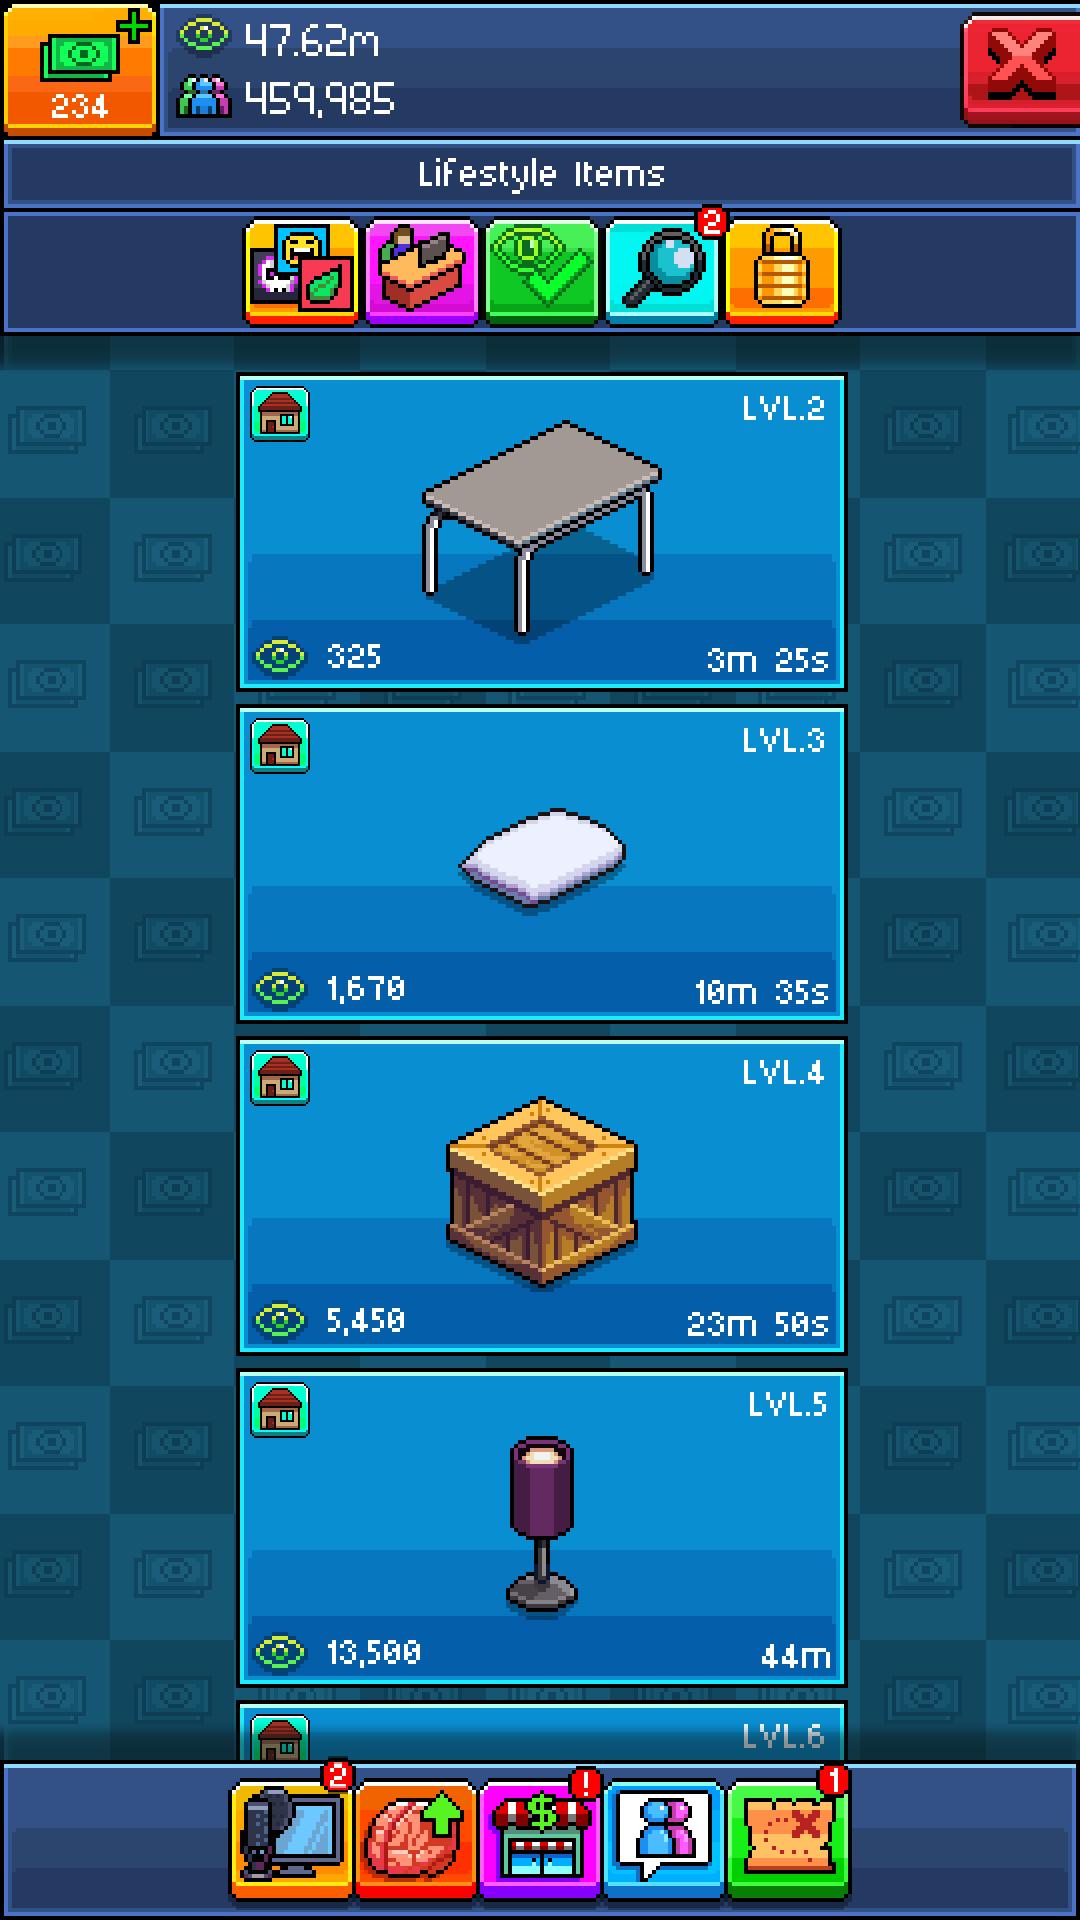 Pewdiepie S Tuber Simulator For Android Apk Download